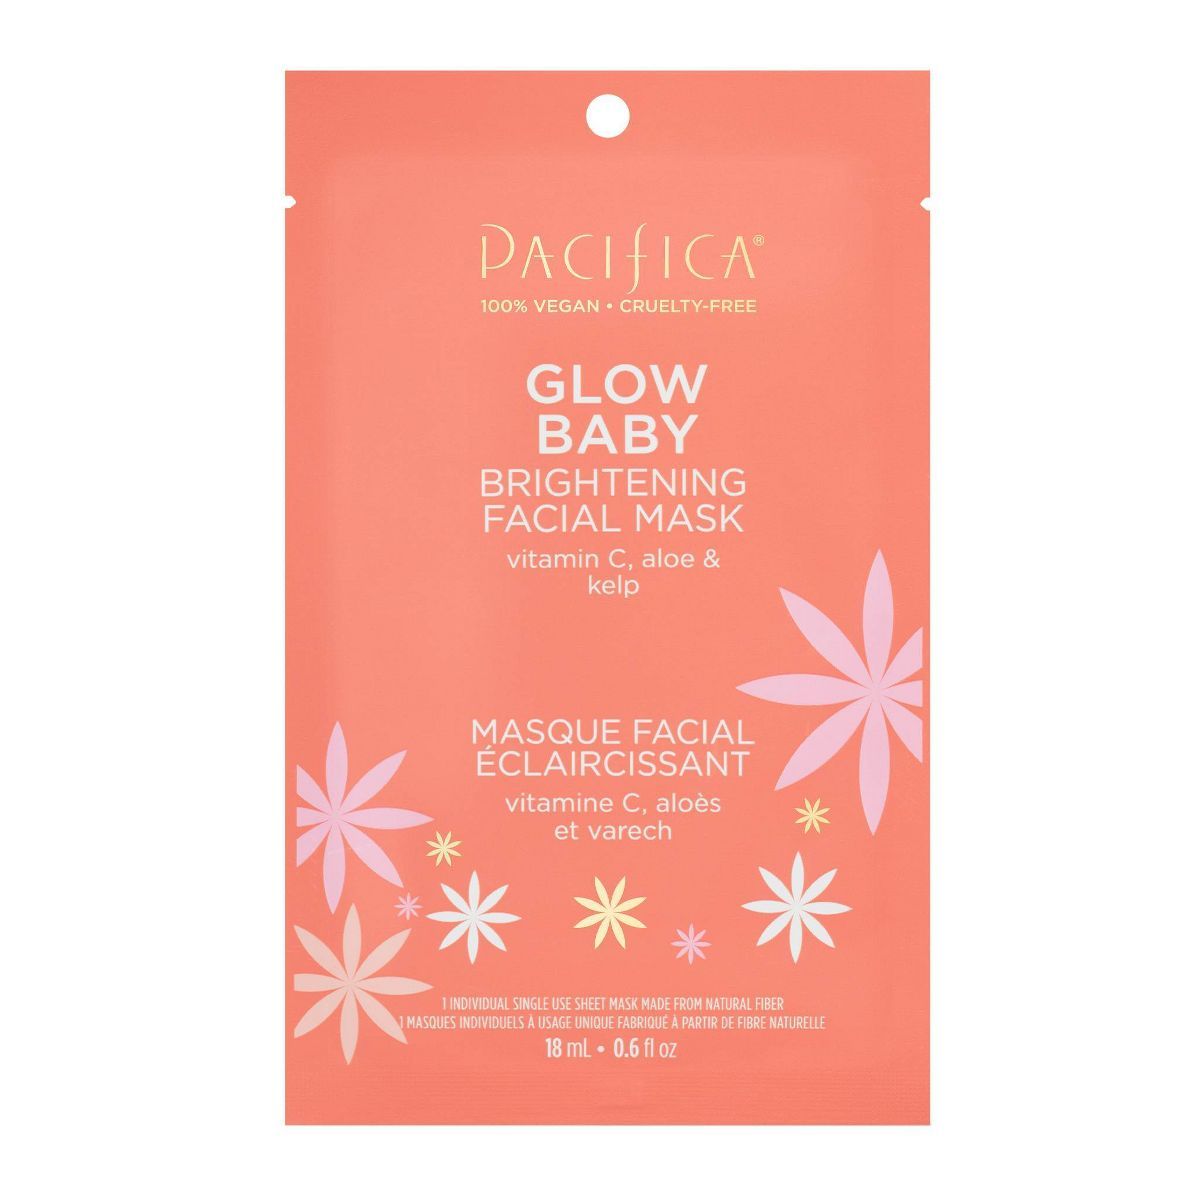 Pacifica Glow Baby Brightening Facial Mask - 0.67 fl oz | Target